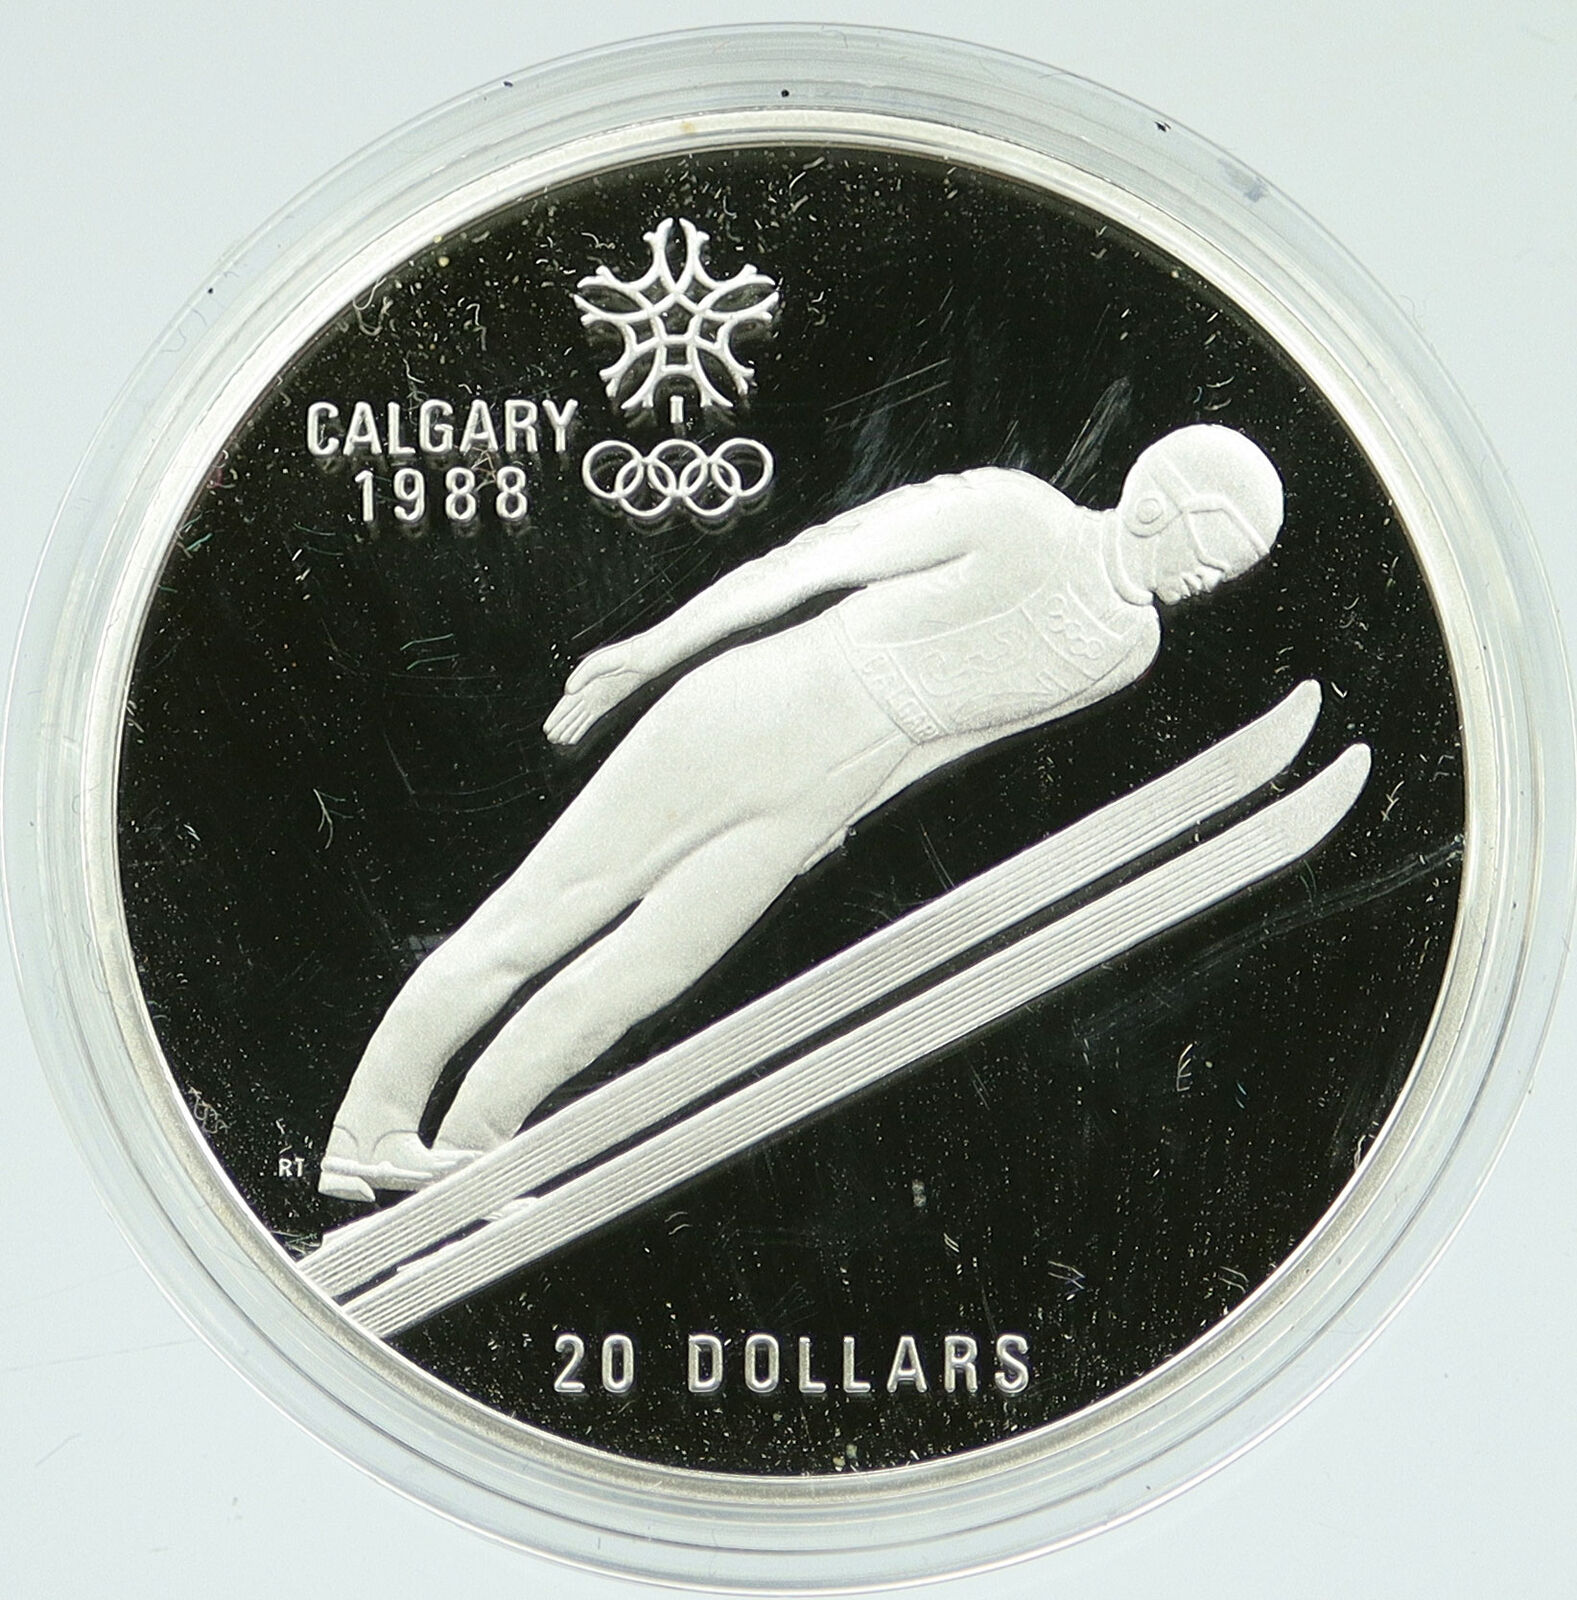 1987 CANADA 1988 CALGARY OLYMPICS Ski Jumping OLD Proof Silver $20 Coin i117257